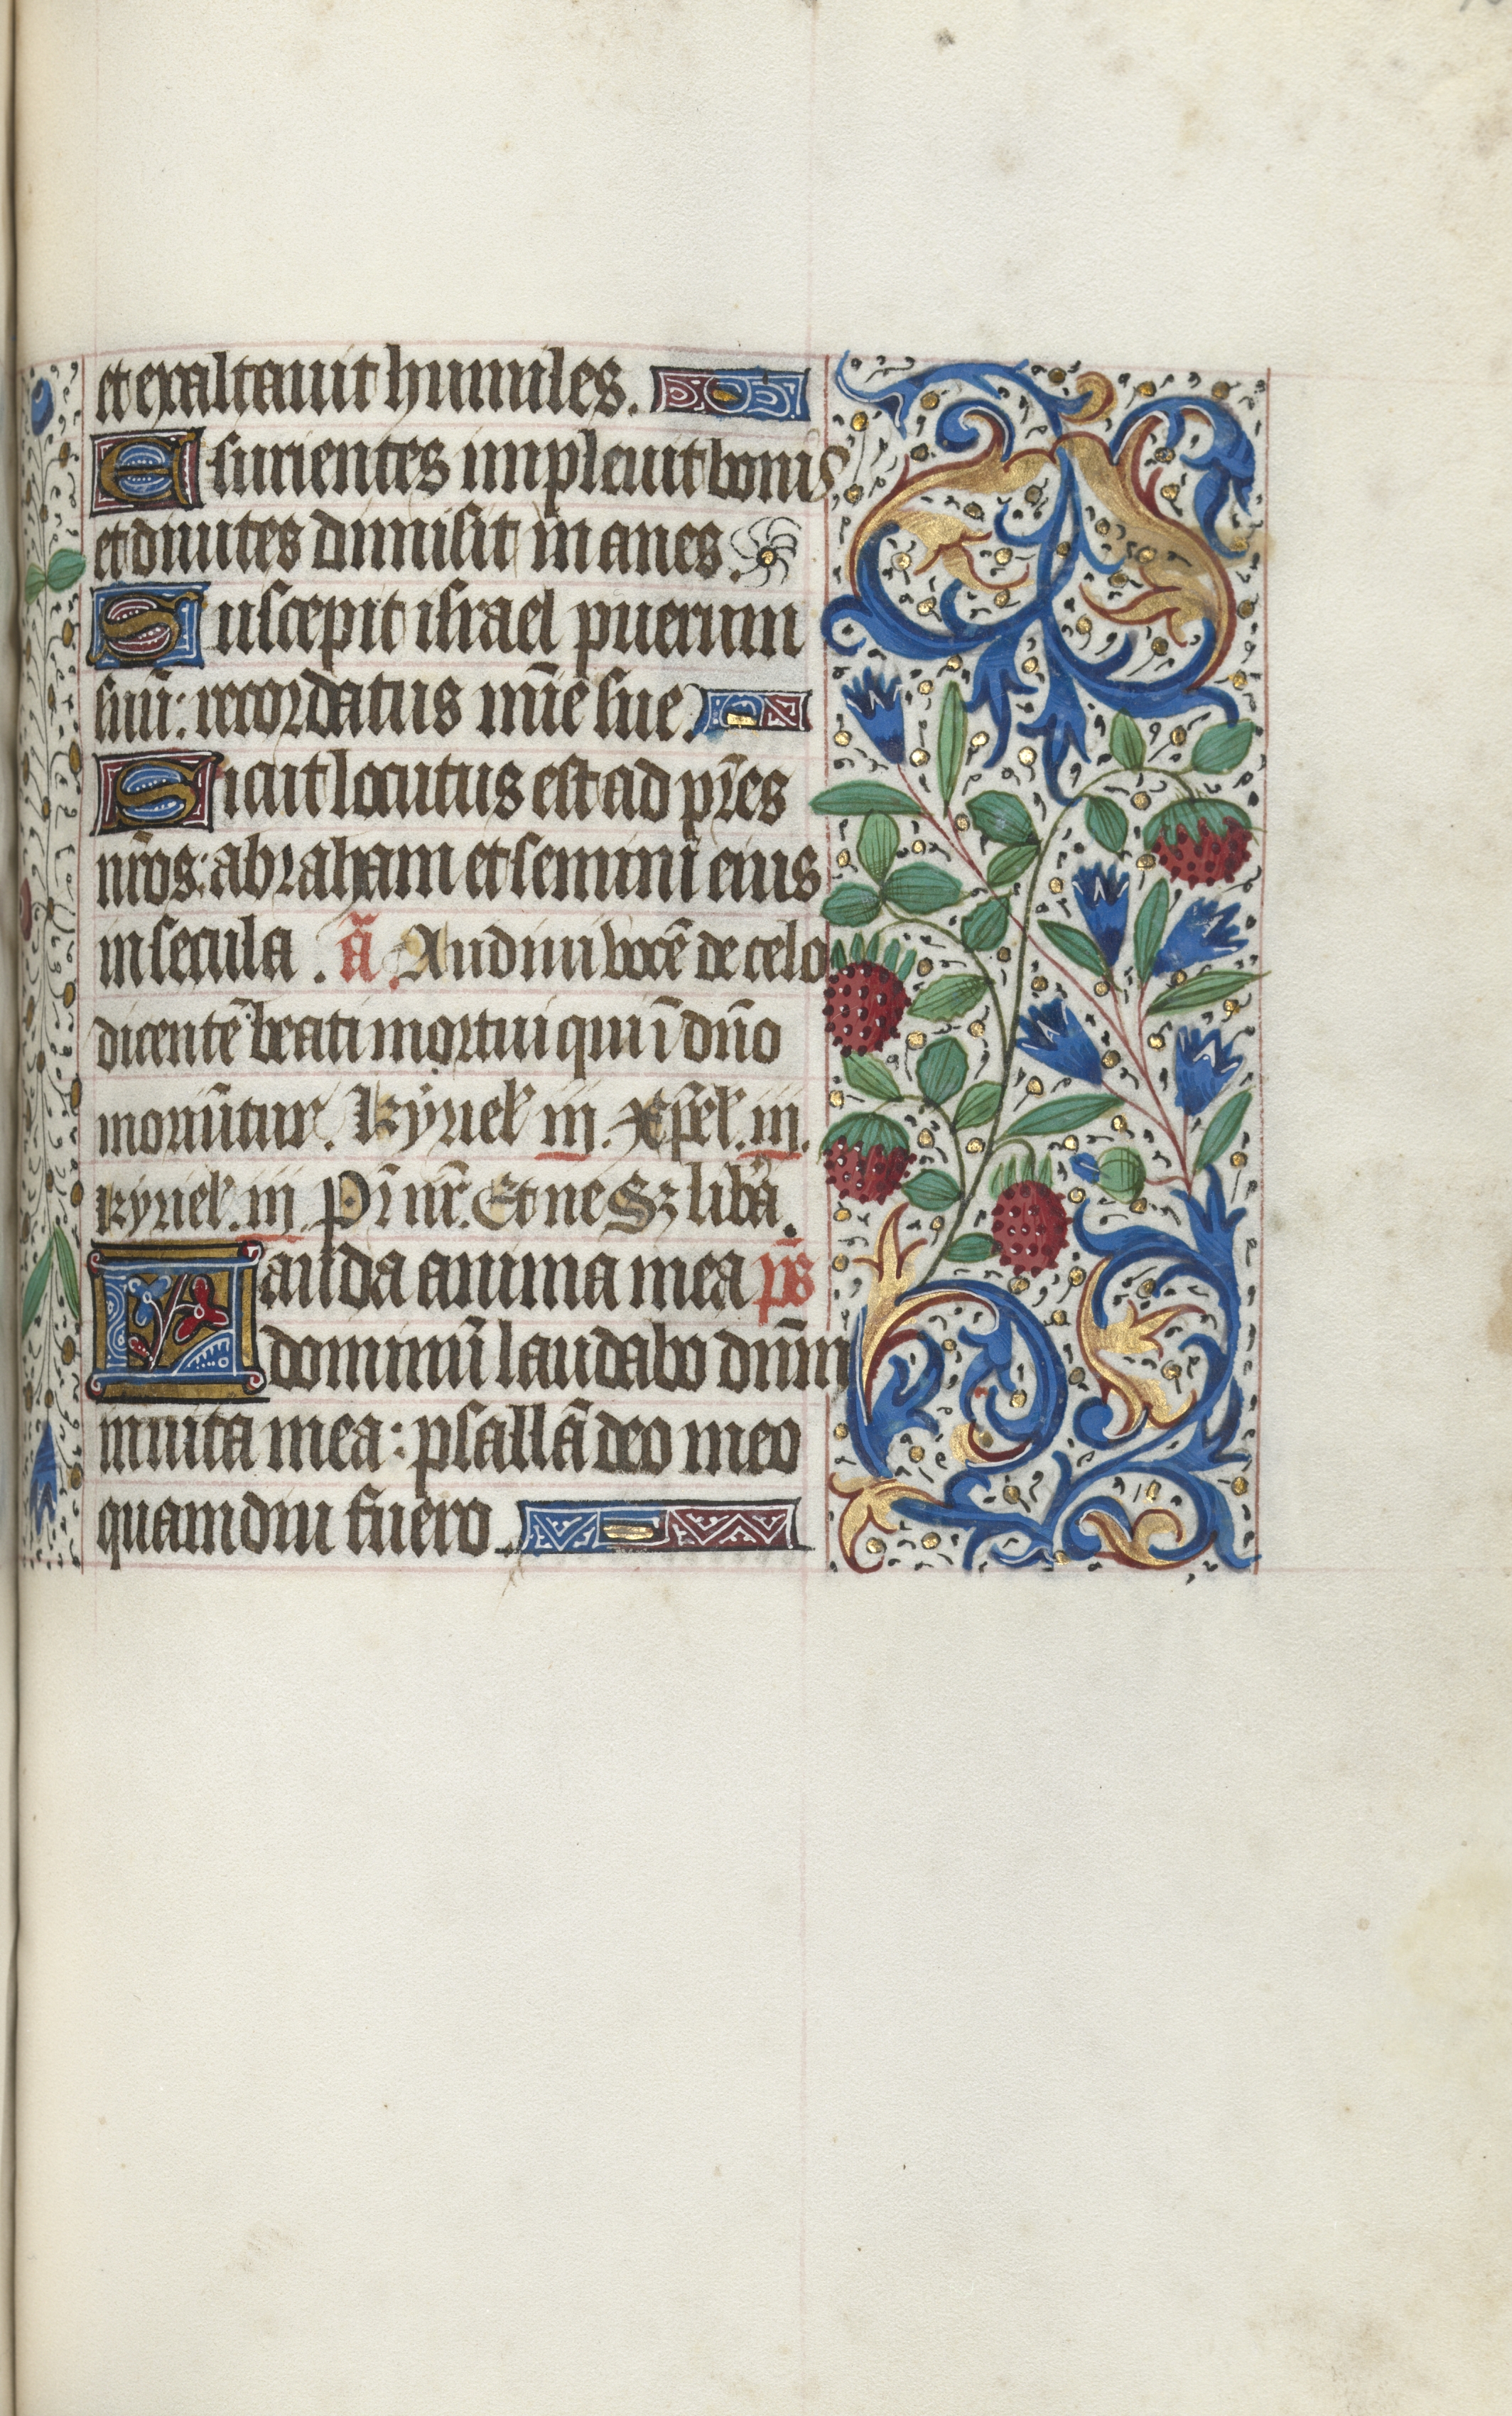 Book of Hours (Use of Rouen): fol. 108r